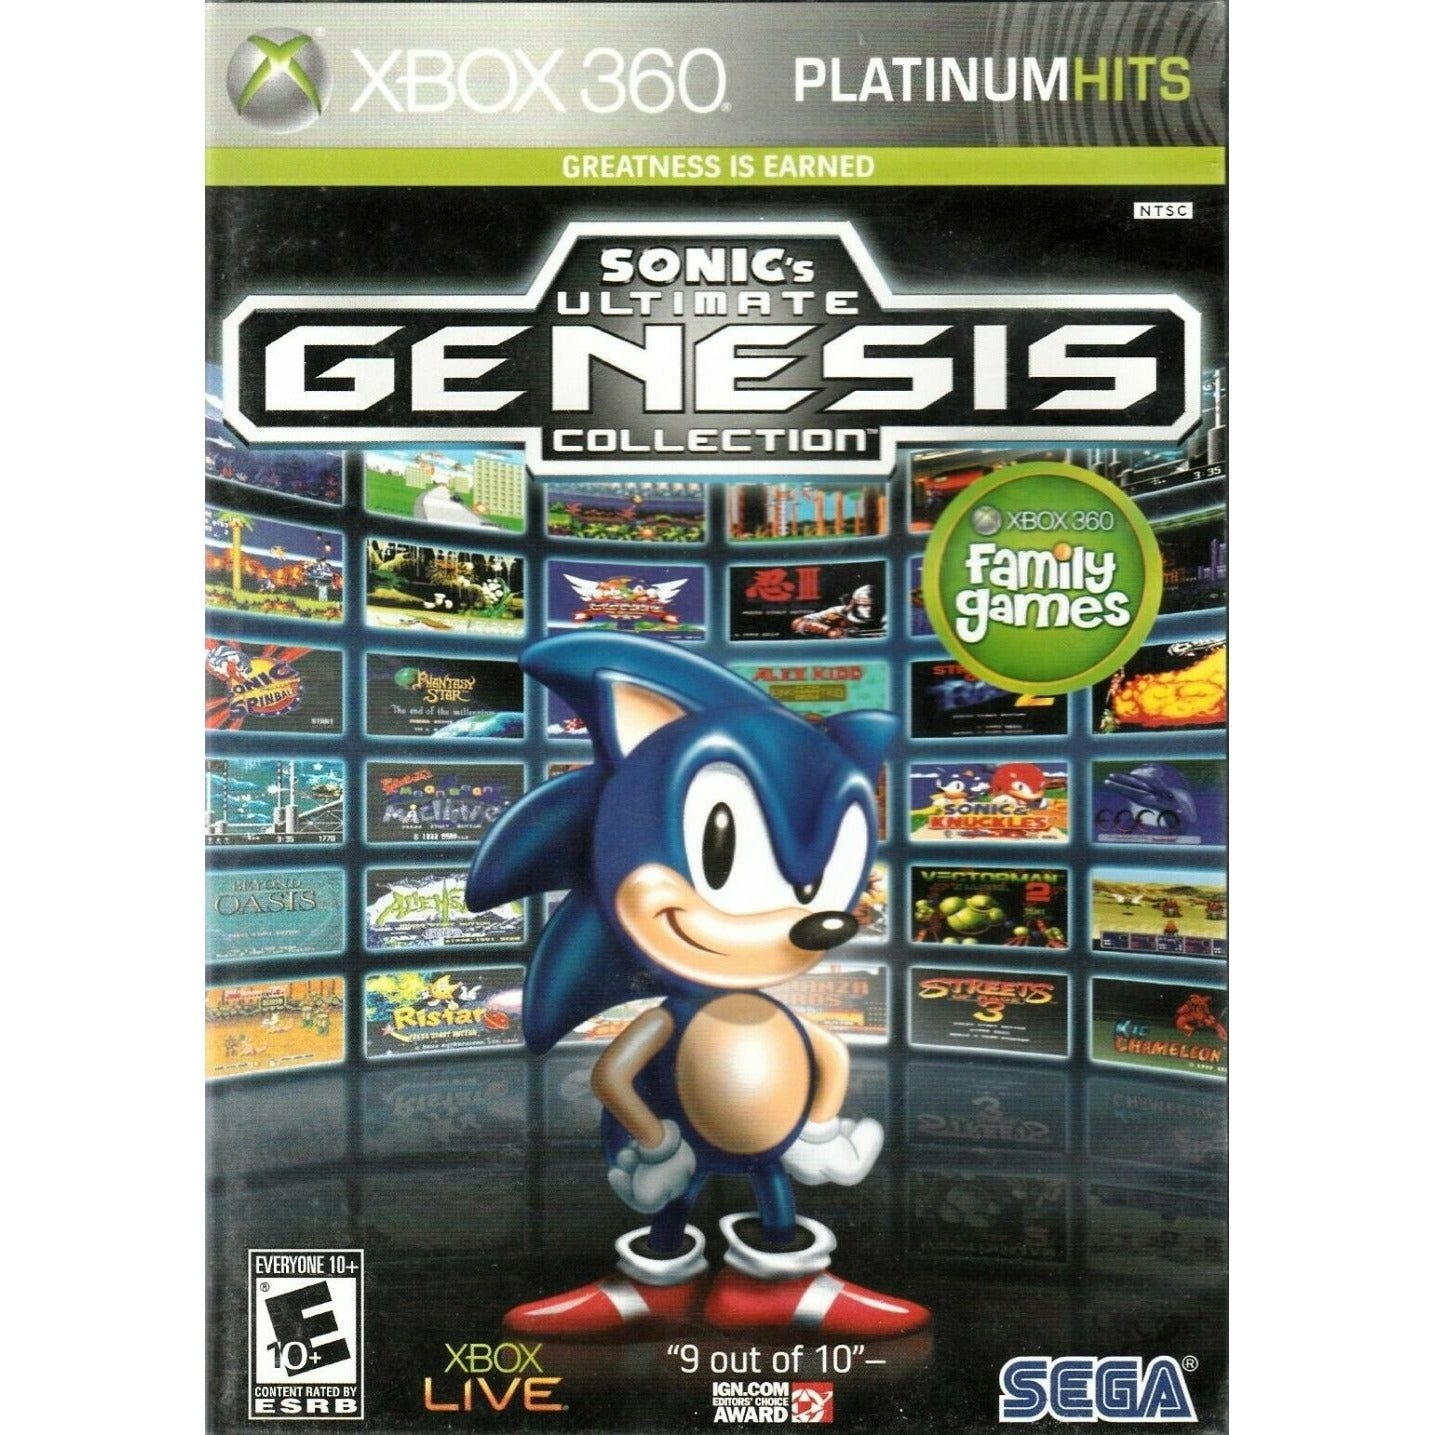 XBOX 360 - Sonic Ultimate Genesis Collection